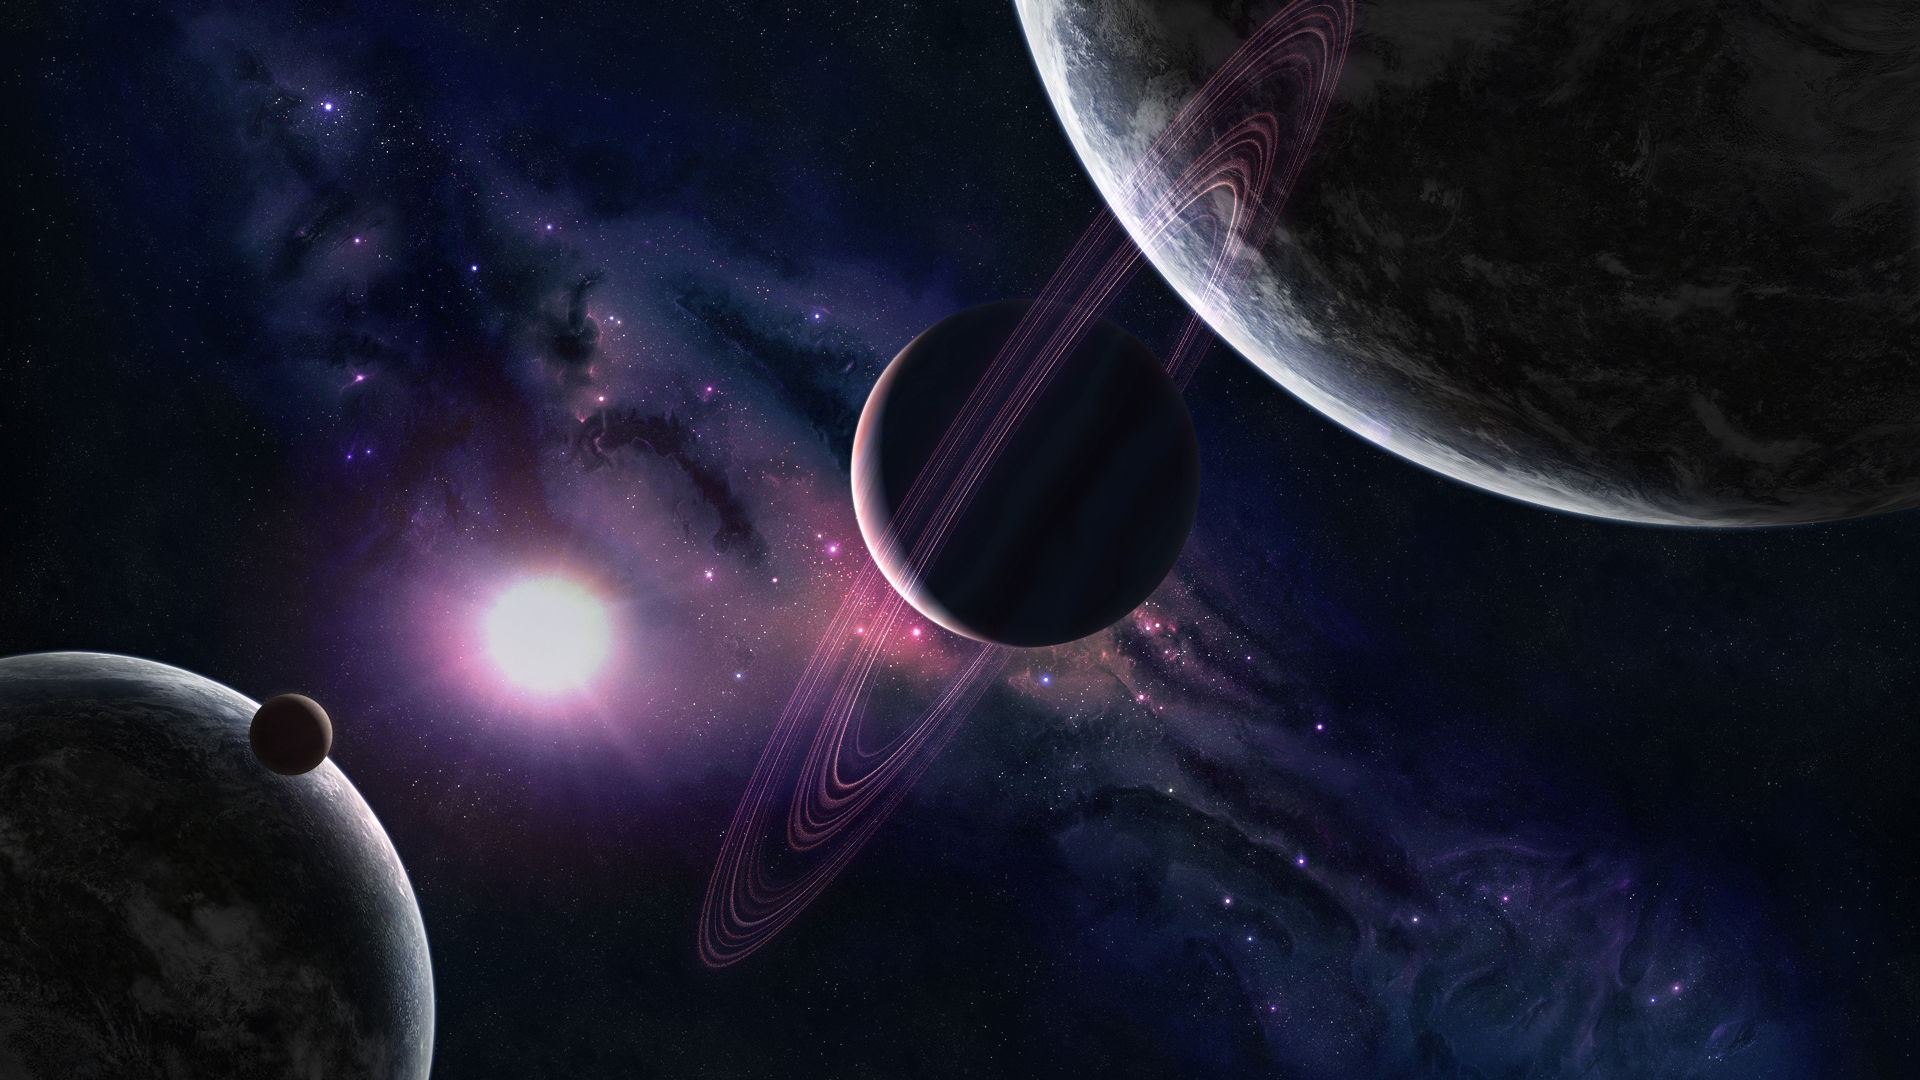 outer space, Solar System, planets, rings - desktop wallpaper